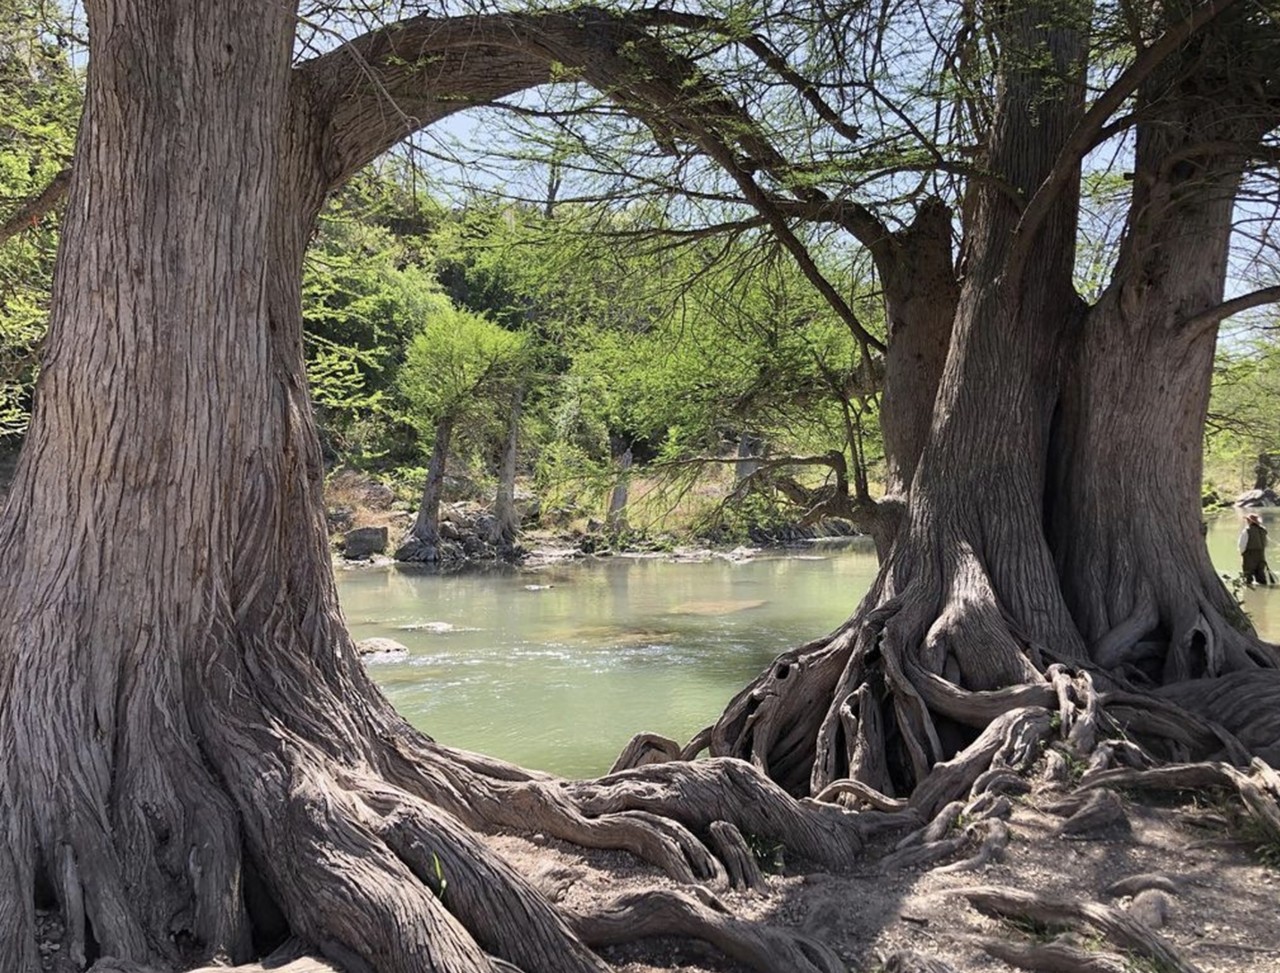 Guadalupe River State Park
3350 Park Rd 31, Spring Branch, (830) 438-2656, tpwd.texas.gov
On certain sections of the 13 miles of trails at Guadalupe River State Park, located west of 281 in Spring Branch, you can even ride your horse! If you want a rougher terrain, try the lesser-traveled Bauer Unit.
Photo via Instagram / lesliercsmith